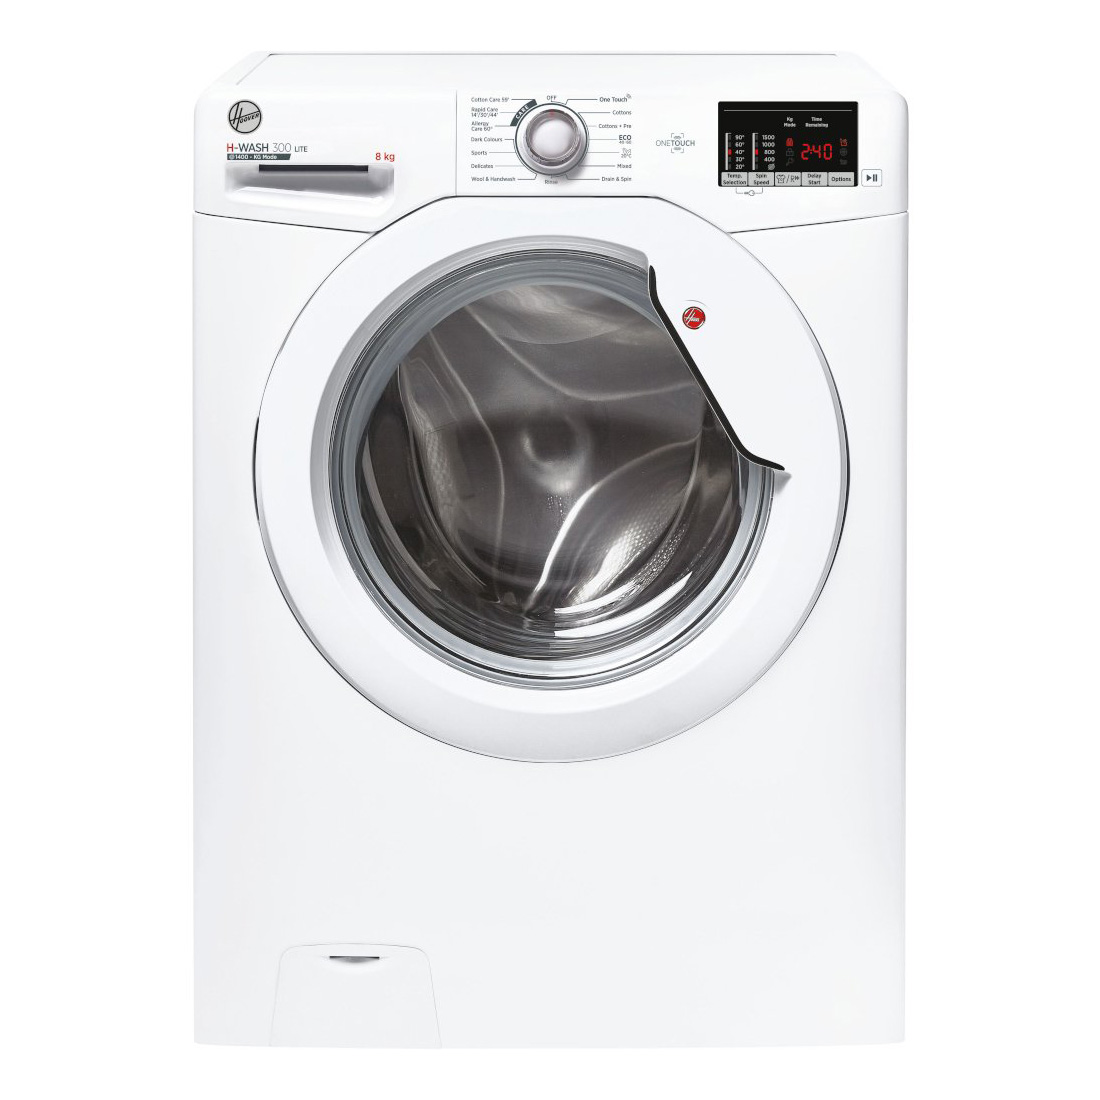 Image of Hoover H3W582DE Washing Machine in White 1500rpm 8Kg D Rated NFC